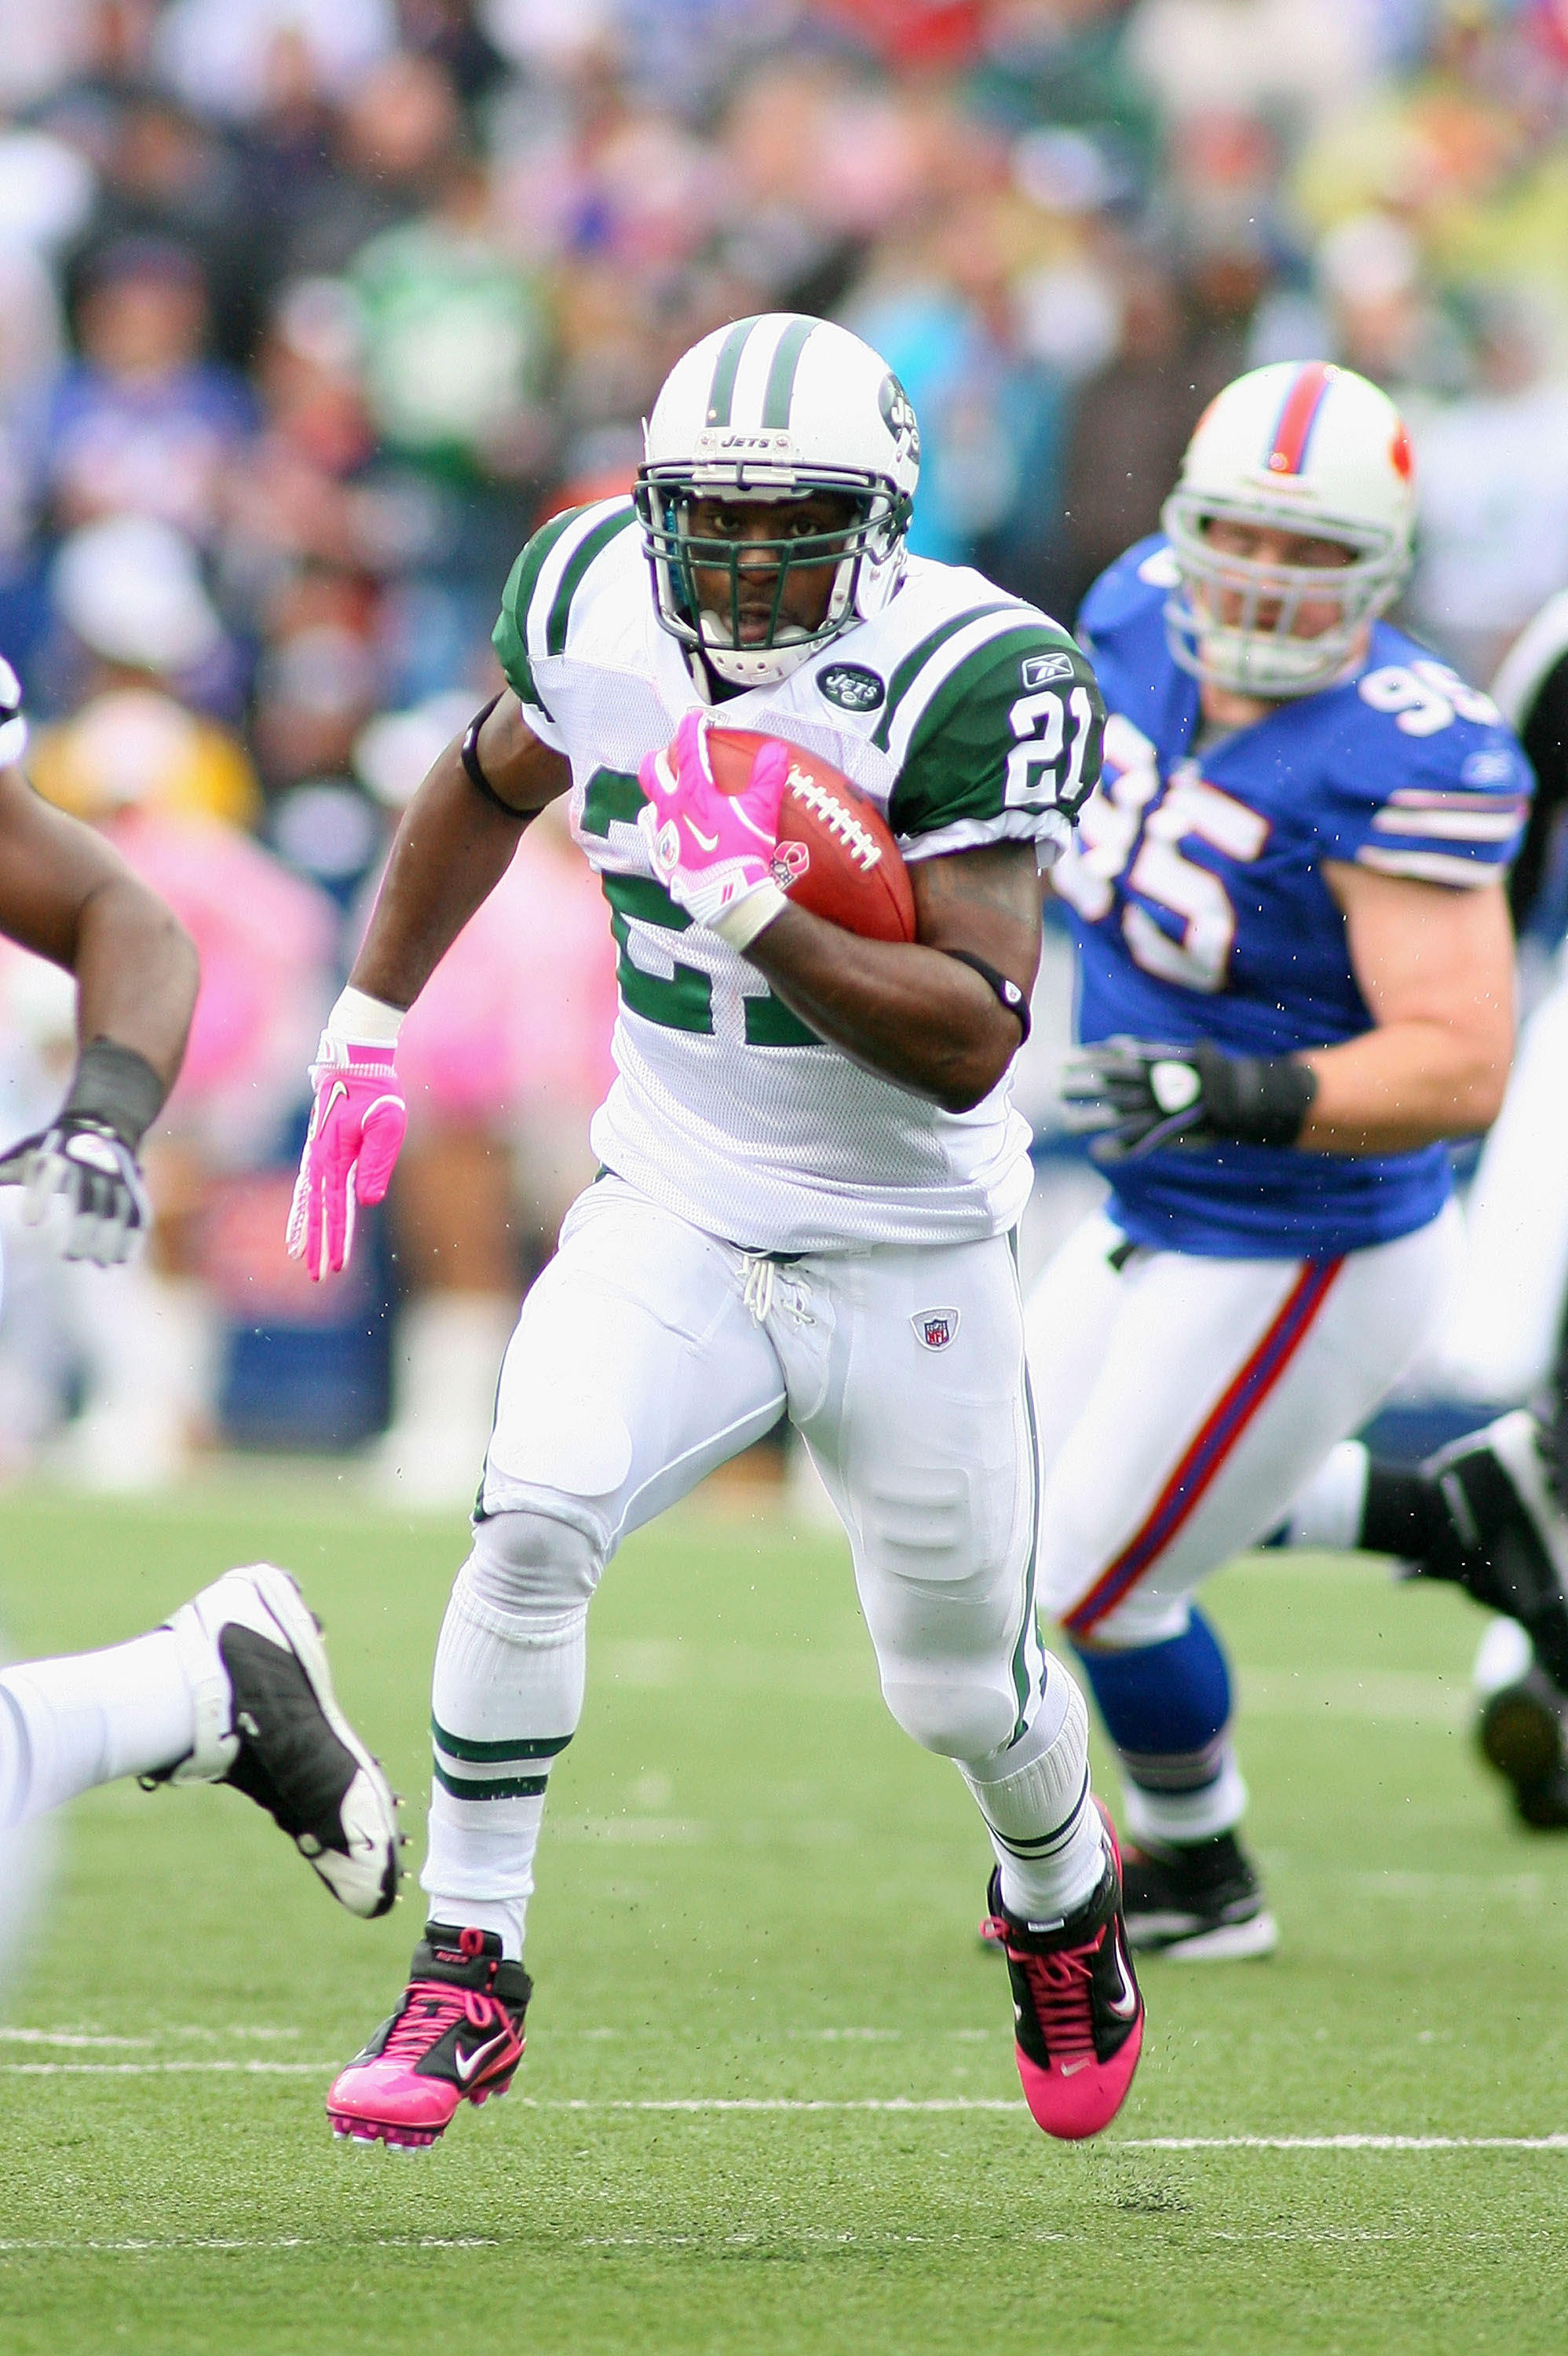 ORCHARD PARK, NY - OCTOBER 03: LaDanian Tomlinson #21 of the New York Jets runs against the Buffalo Bills at Ralph Wilson Stadium on October 3, 2010 in Orchard Park, New York. The Jets won 38-14. (Photo by Rick Stewart/Getty Images)